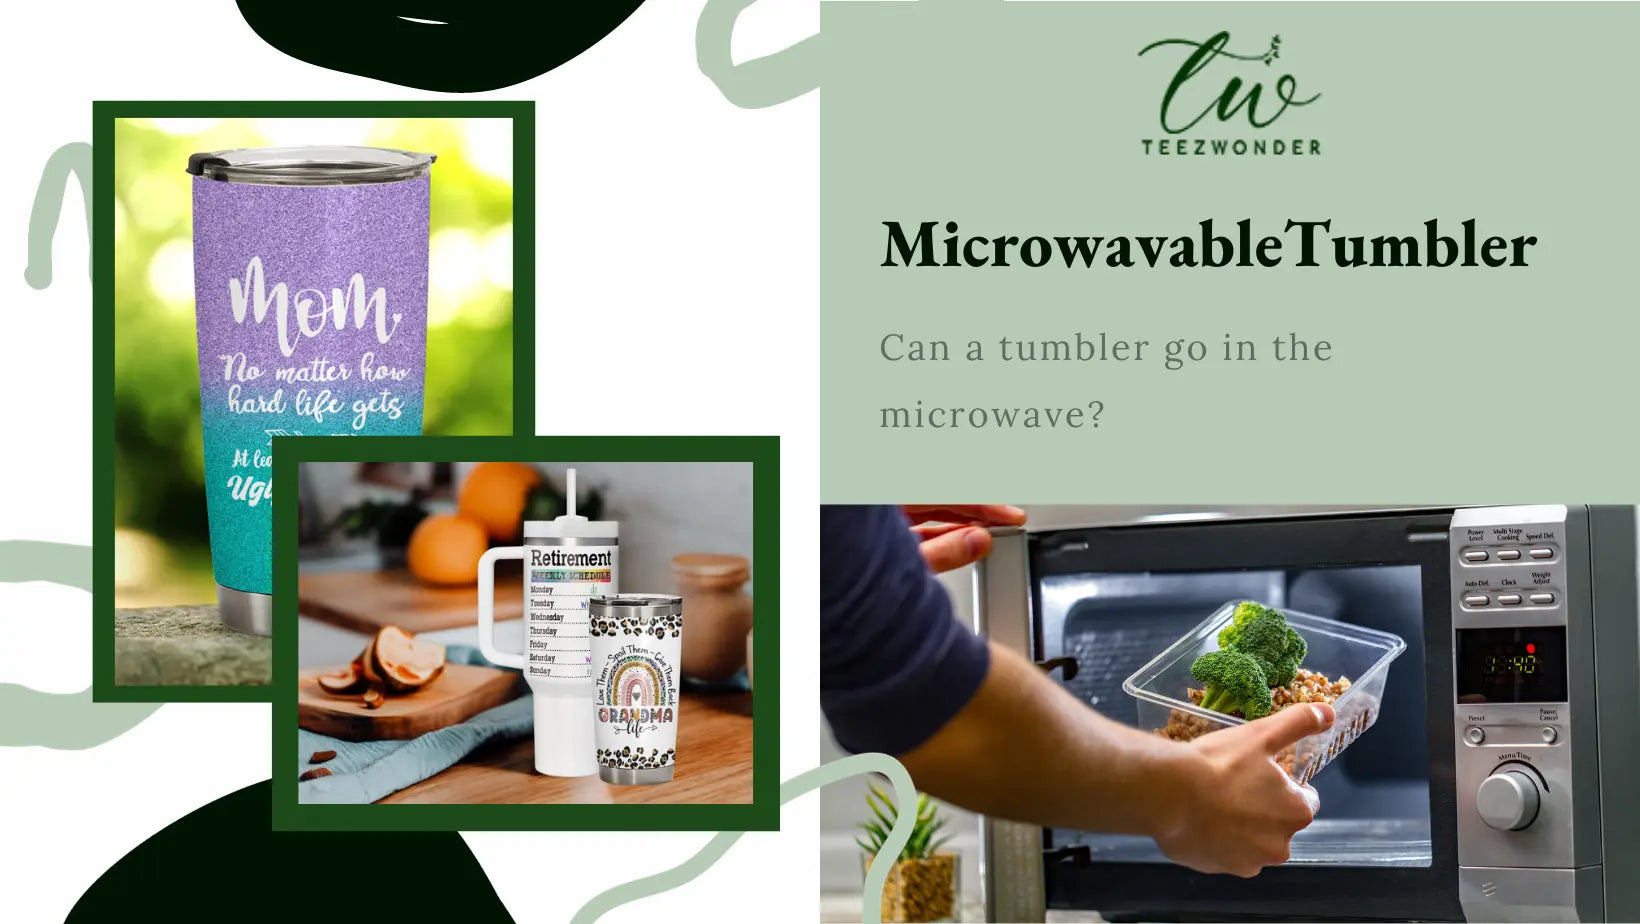 Microwavable tumbler: Can a tumbler go in the microwave?